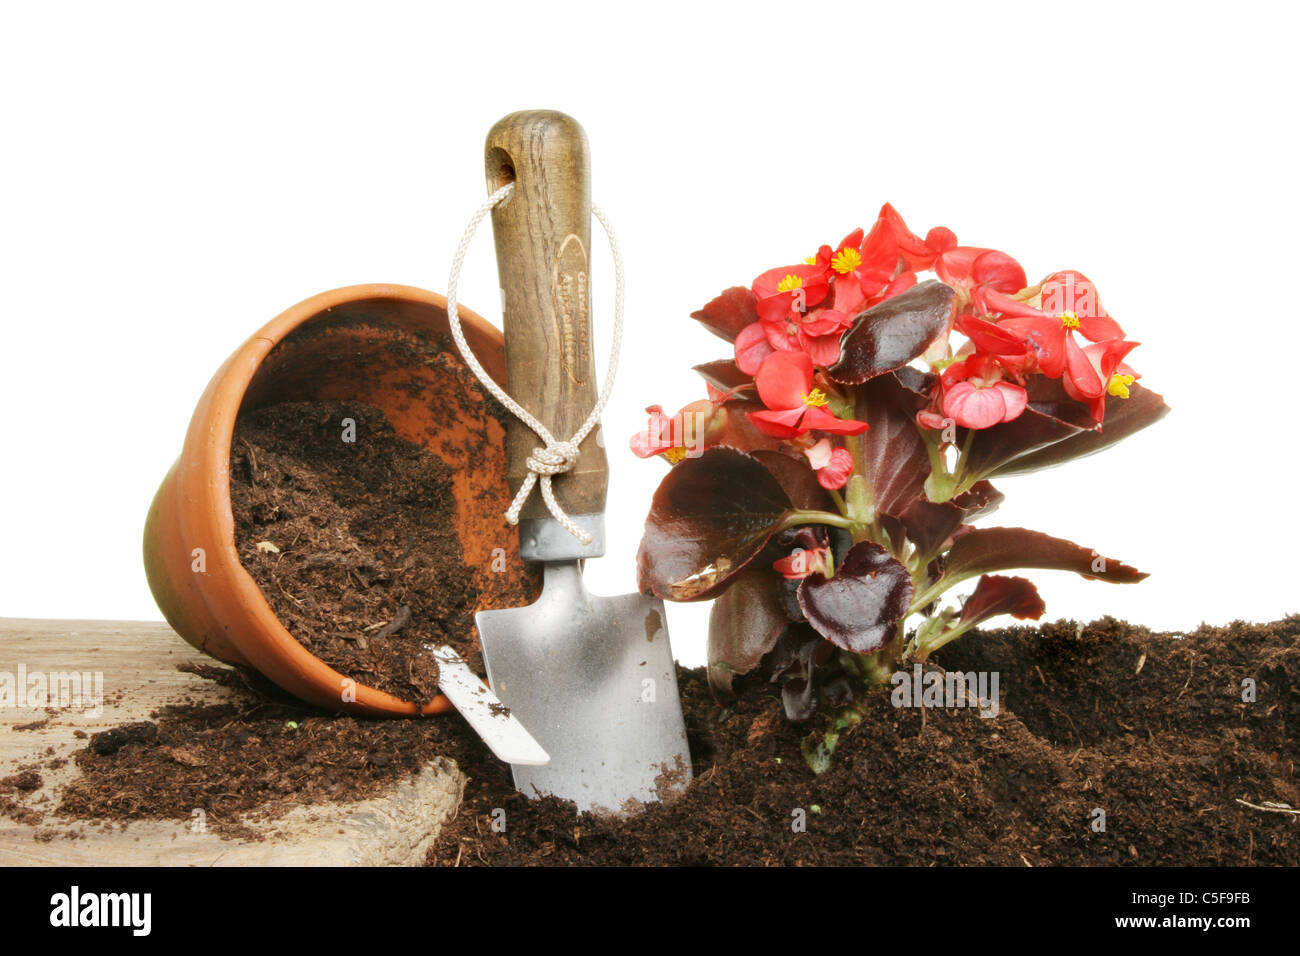 Planting a begonia Summer bedding plant from a pot to the soil Stock Photo